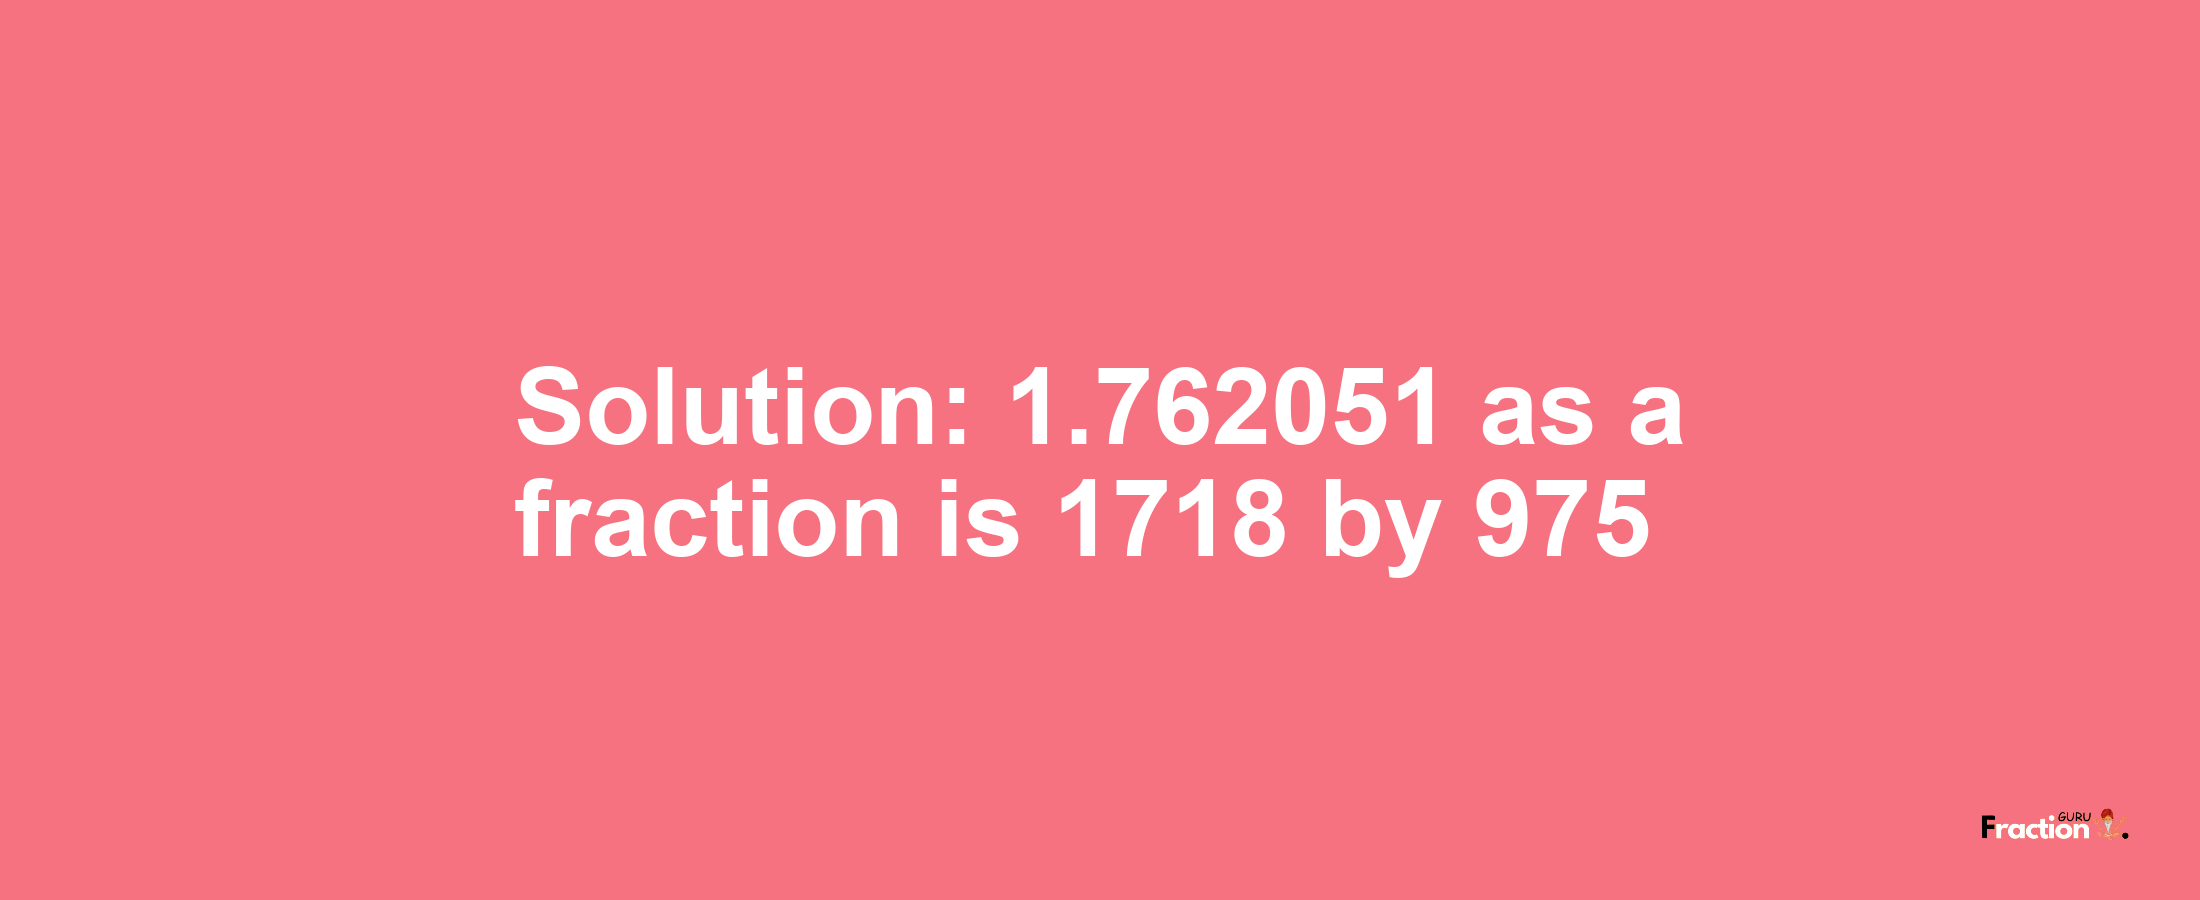 Solution:1.762051 as a fraction is 1718/975